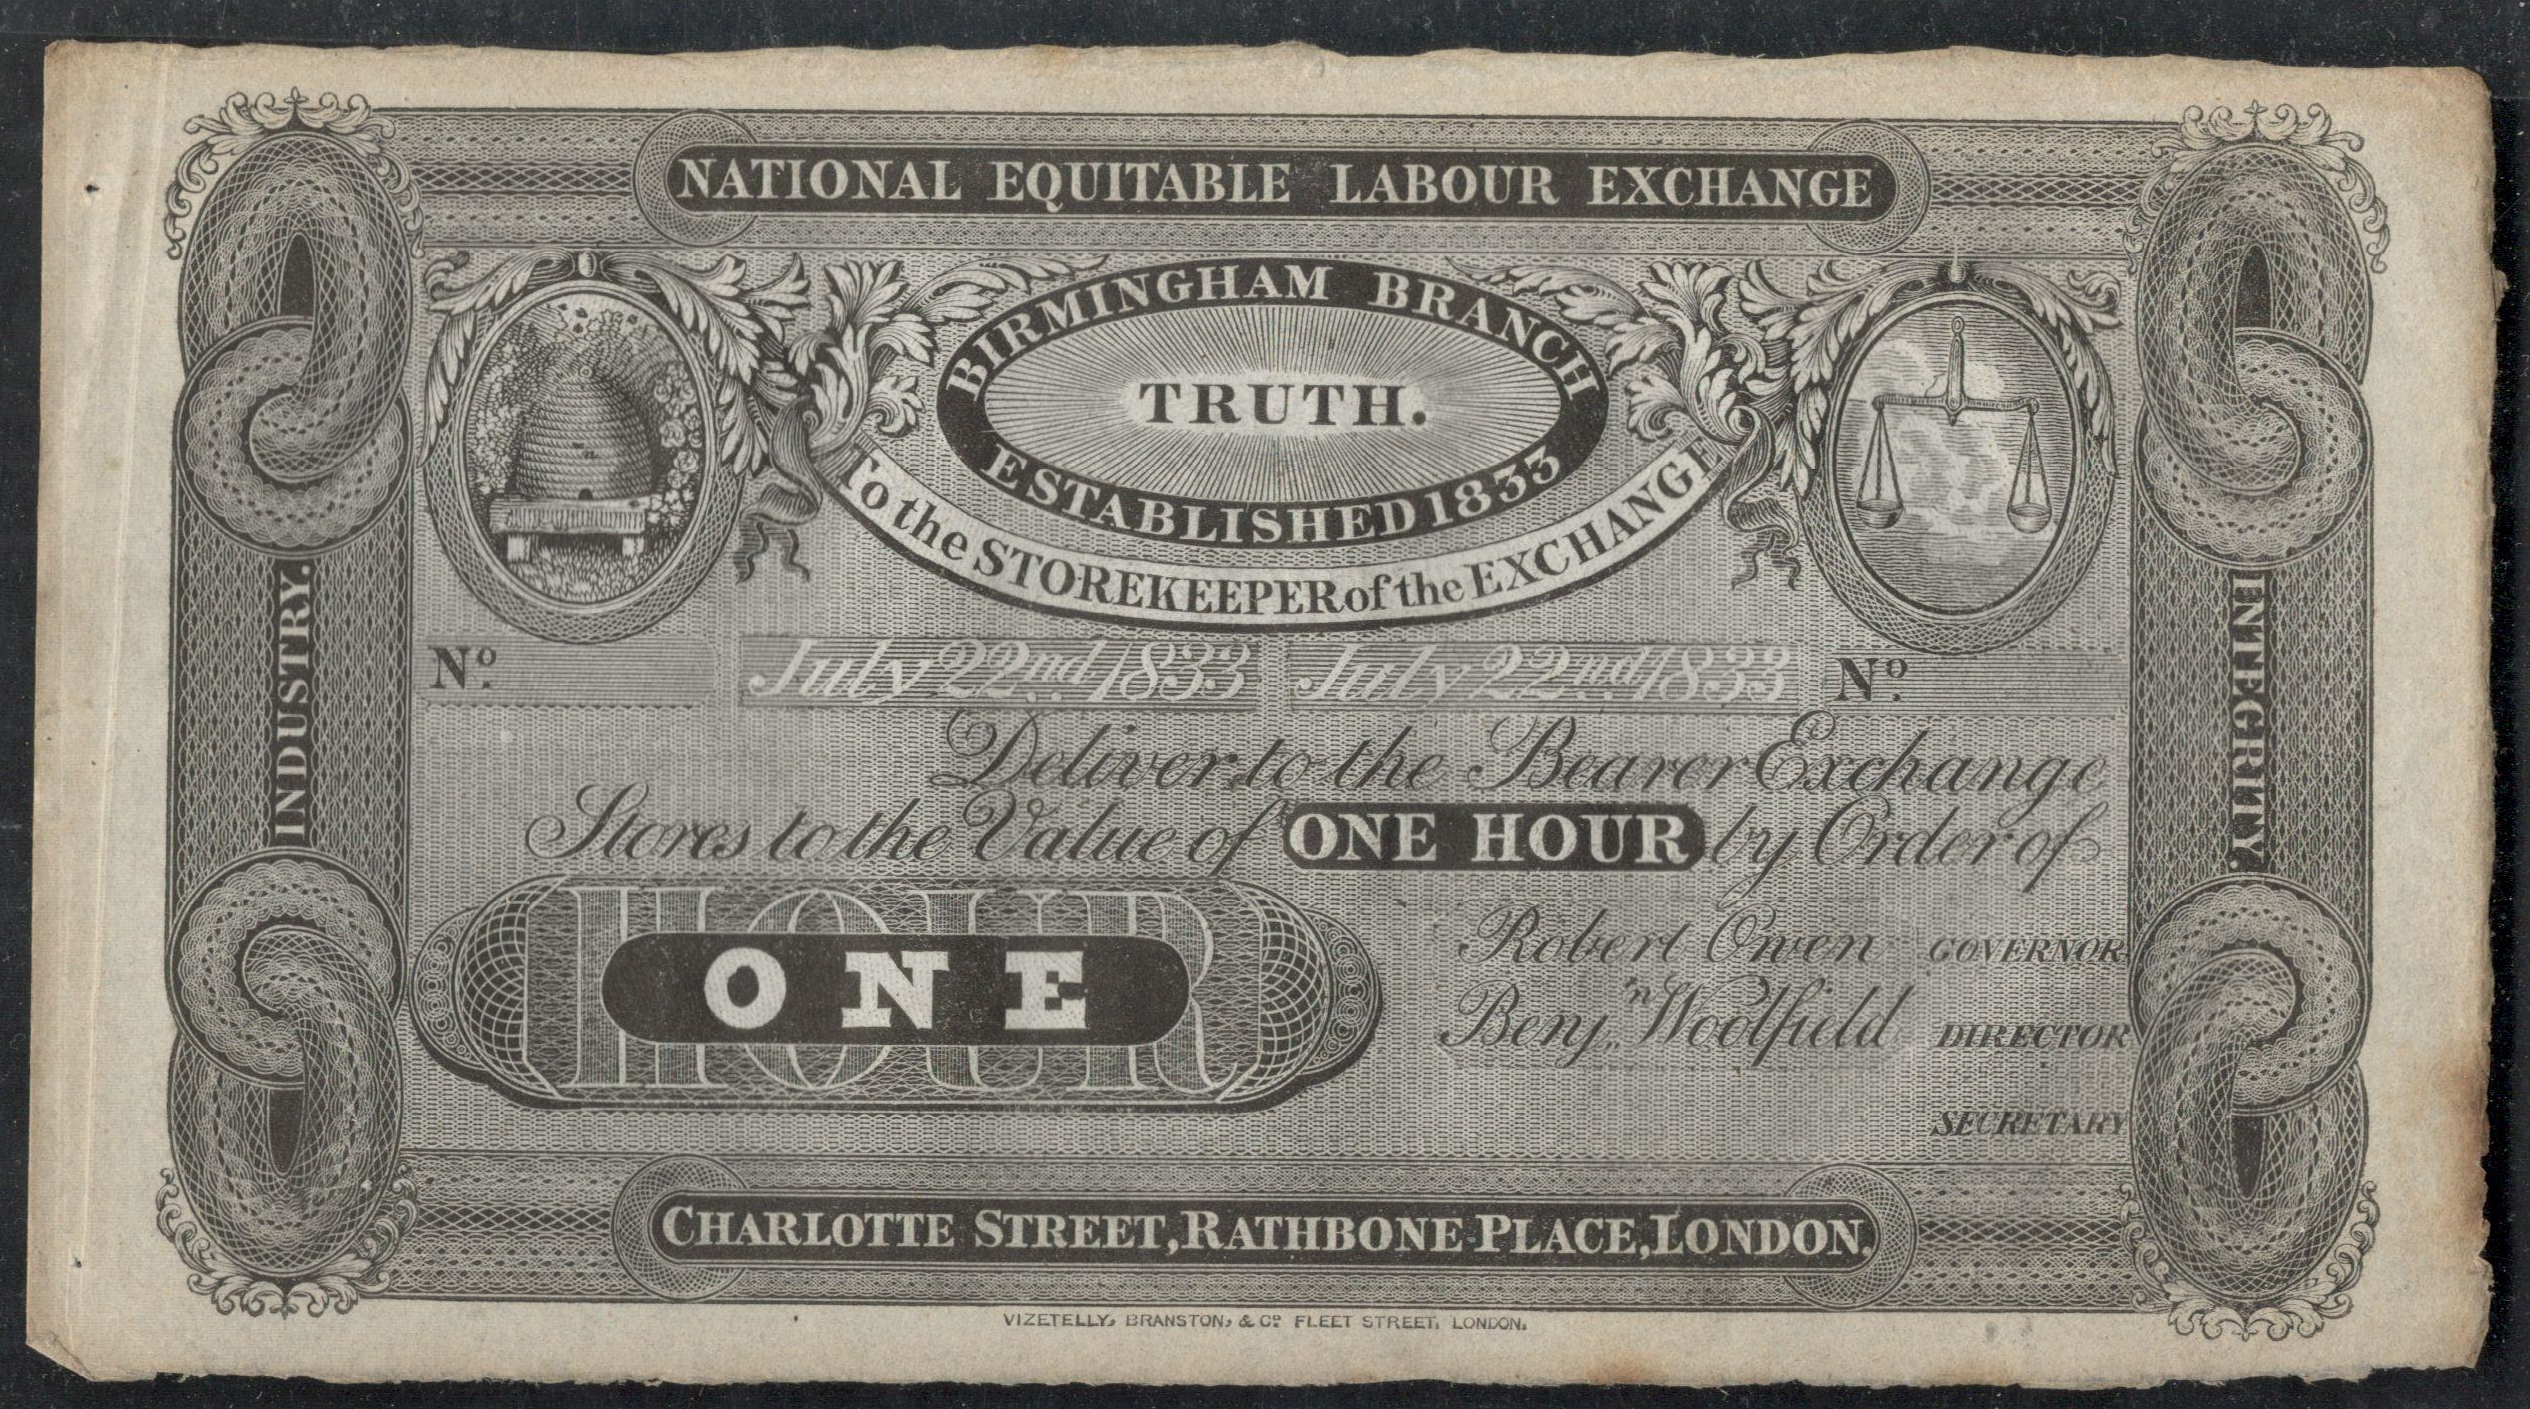 1833 ROBERT OWEN ONE HOUR NOTE - NATIONAL EQUITABLE LABOUR EXCHANGE